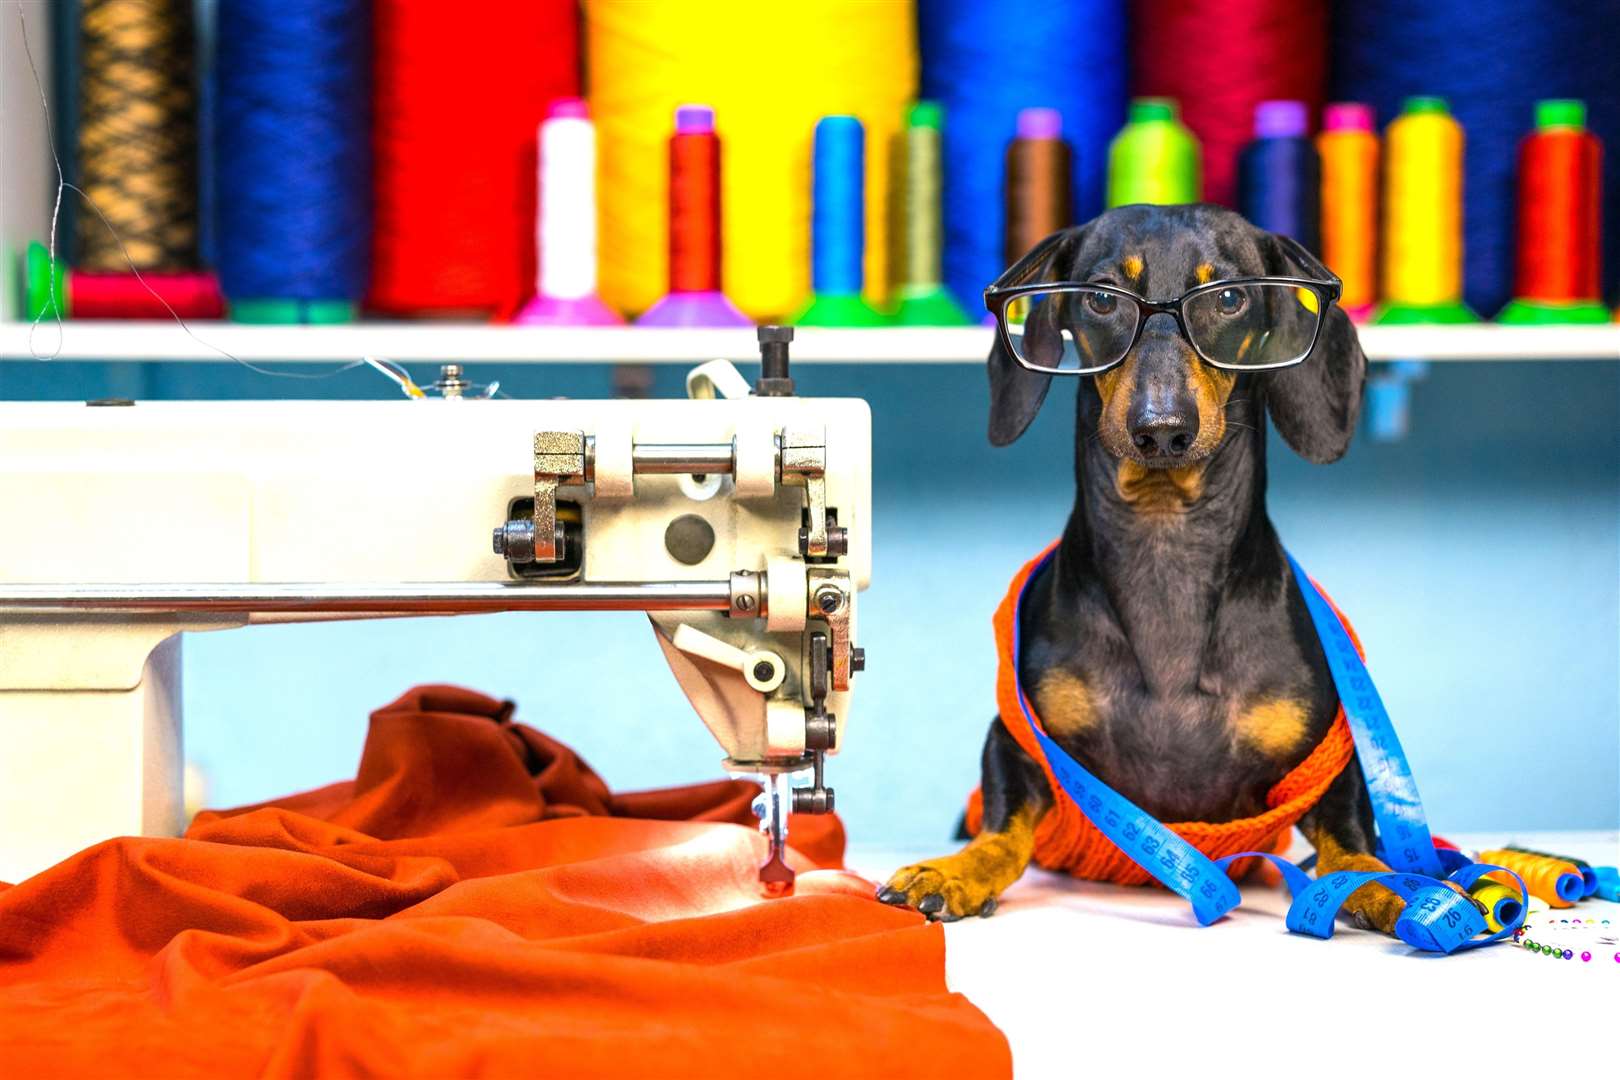 The project is looking to involve local sewing mentors so, if you have sewing based experience or interest, please contact the project to join in and share your skills. Picture: AdobeStock